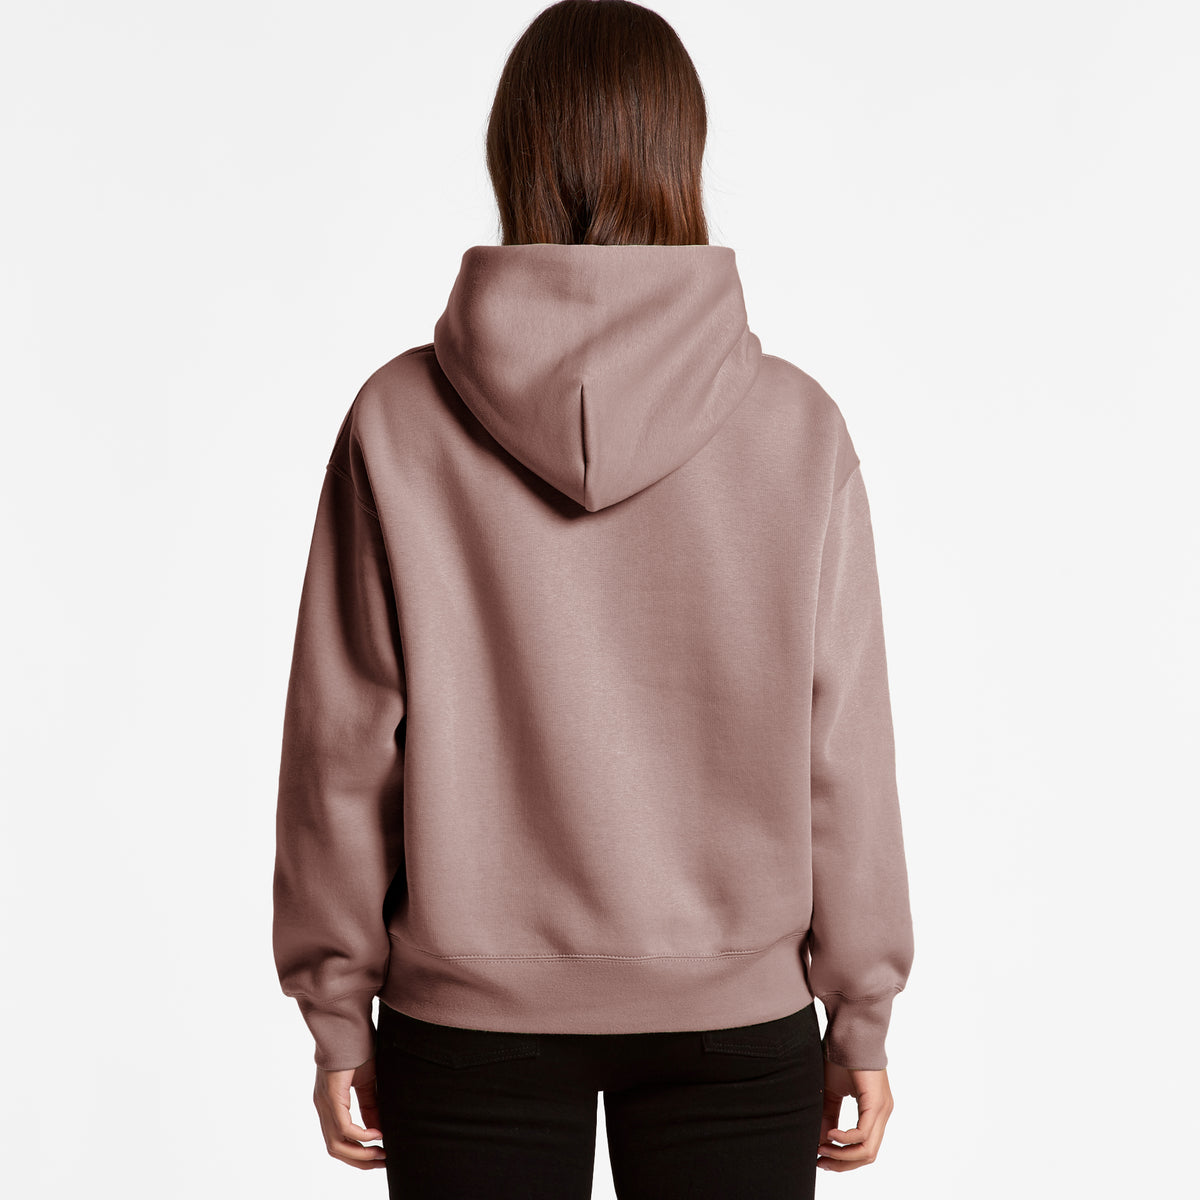 Heart Full of Autumn Leaves - Women&#39;s Heavyweight Relaxed Hoodie